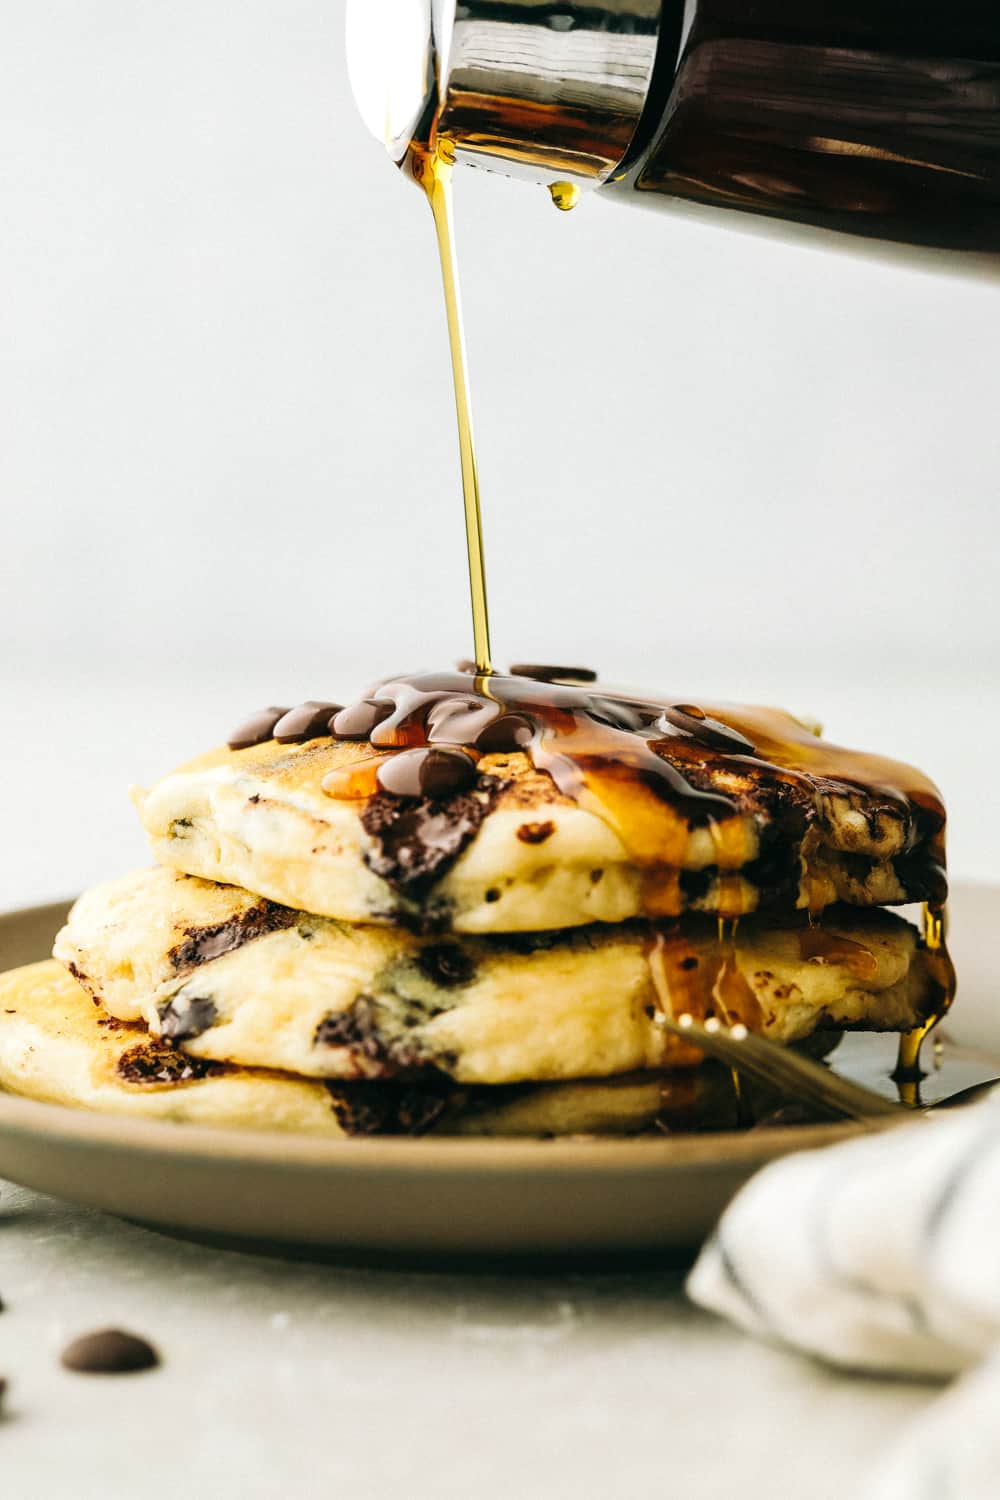 Syrup pouring on top of chocolate chip panckaes.